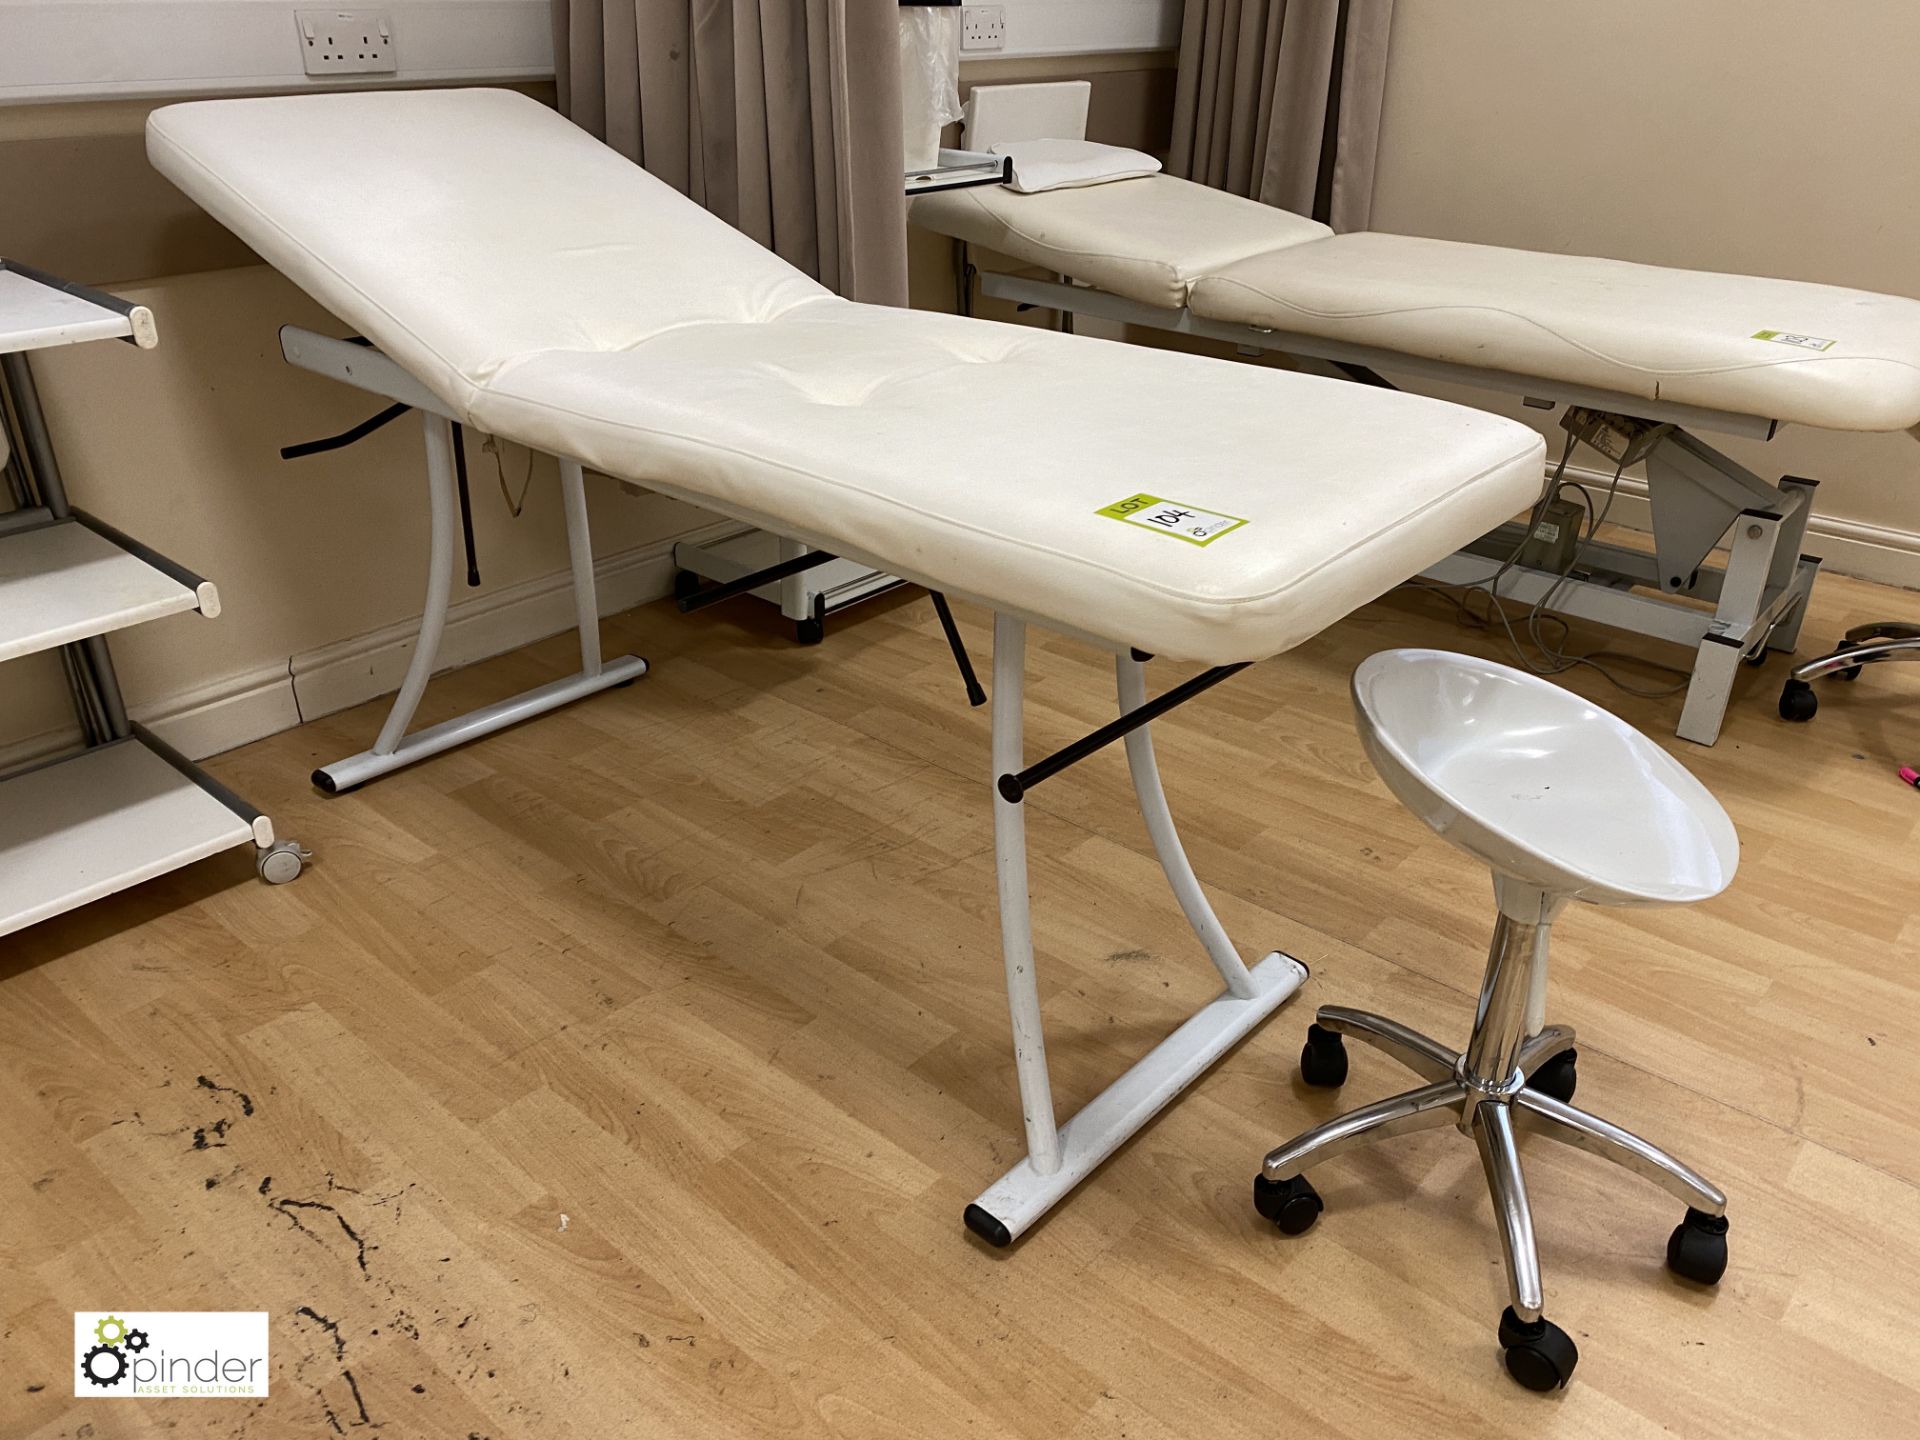 Manual adjustable Beauty Bed, with mobile trolley and stool (location: Level 3, B372 Room) - Image 2 of 2